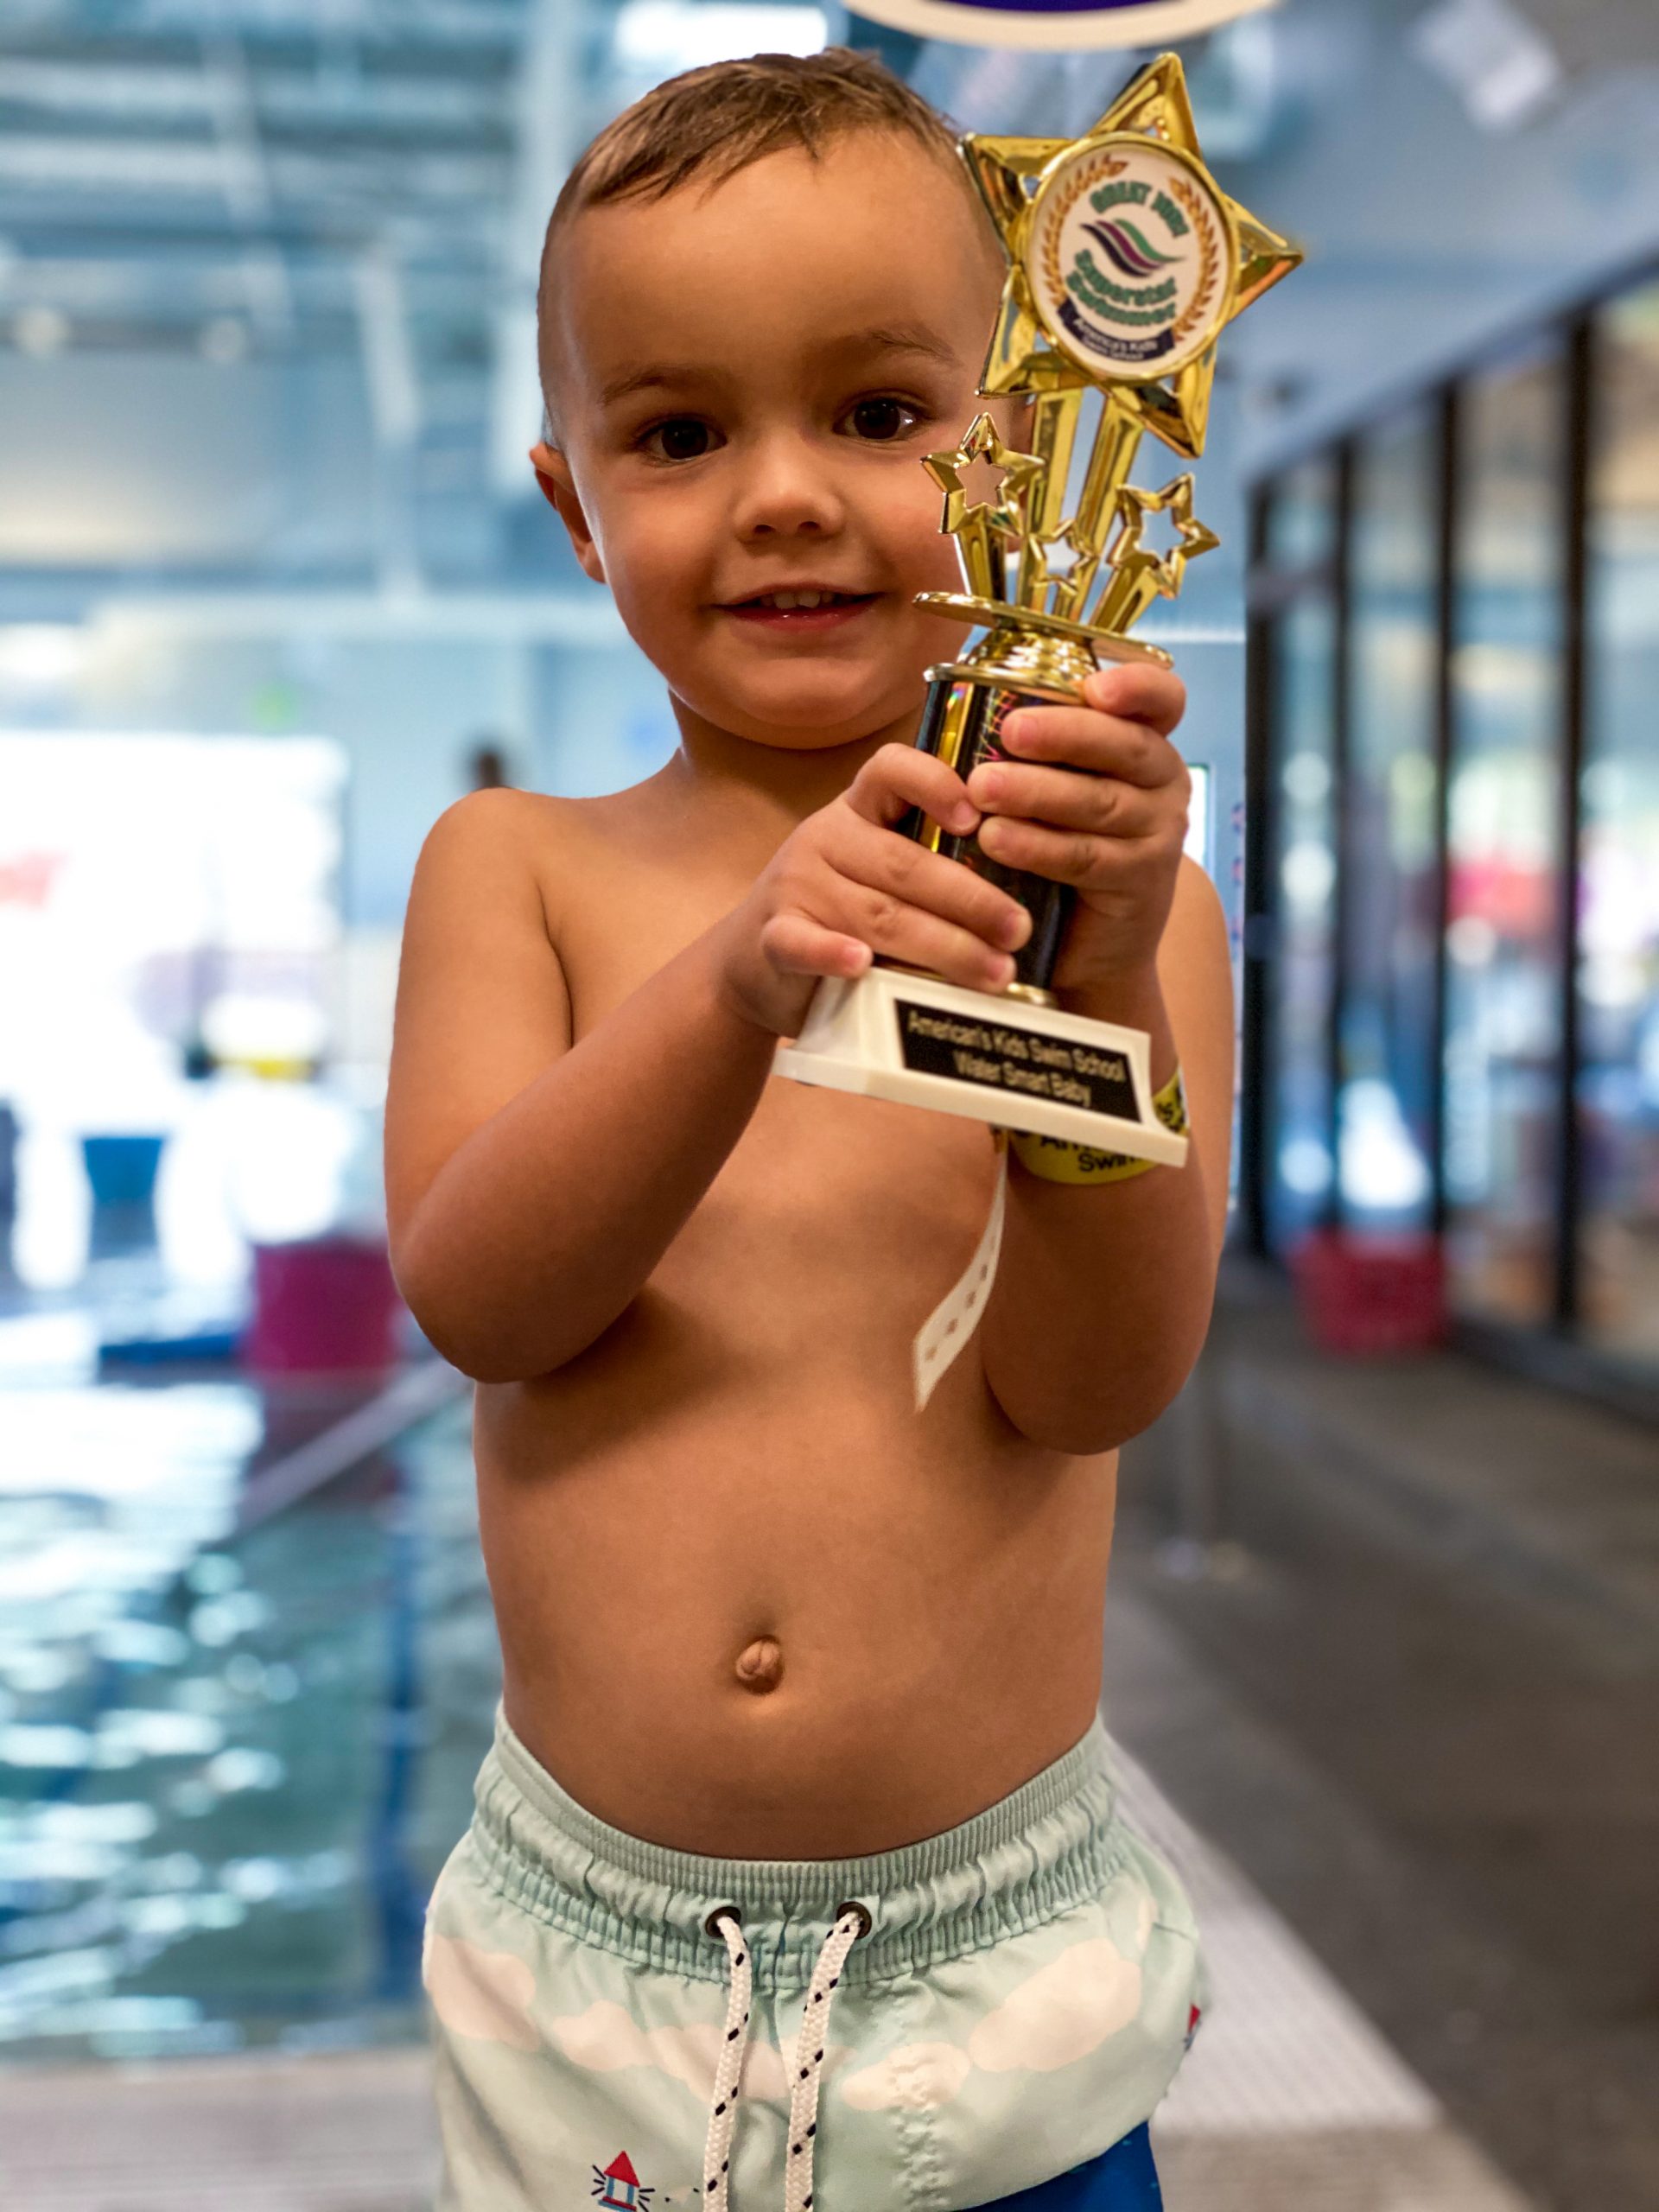 Toddler receives trophy for completing swim course